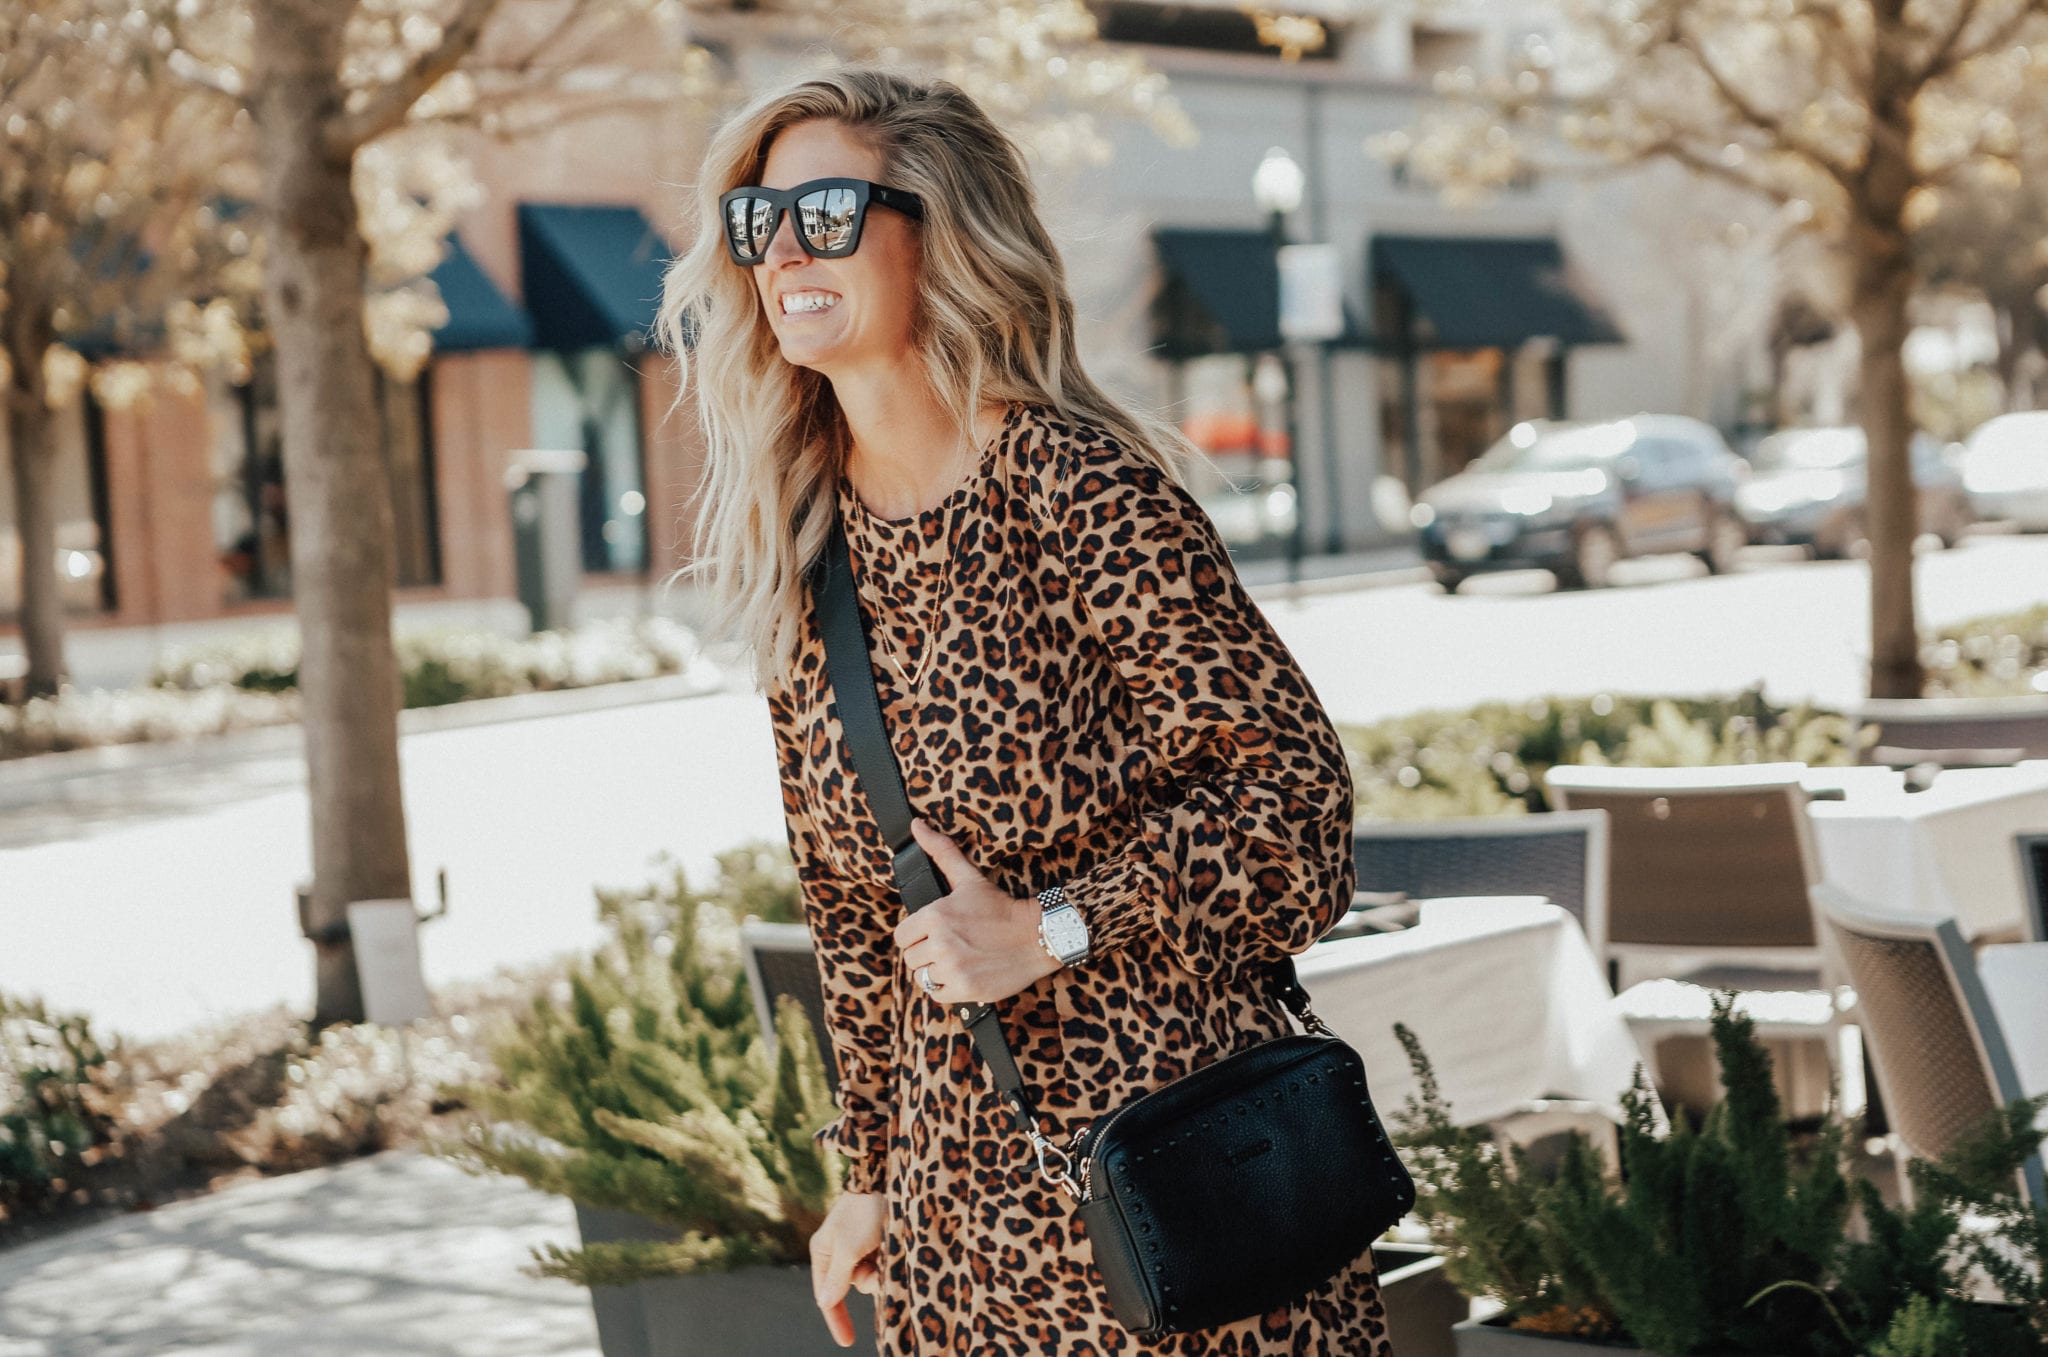 The Animal Print Trend: Why Animal Prints Are Still Trending